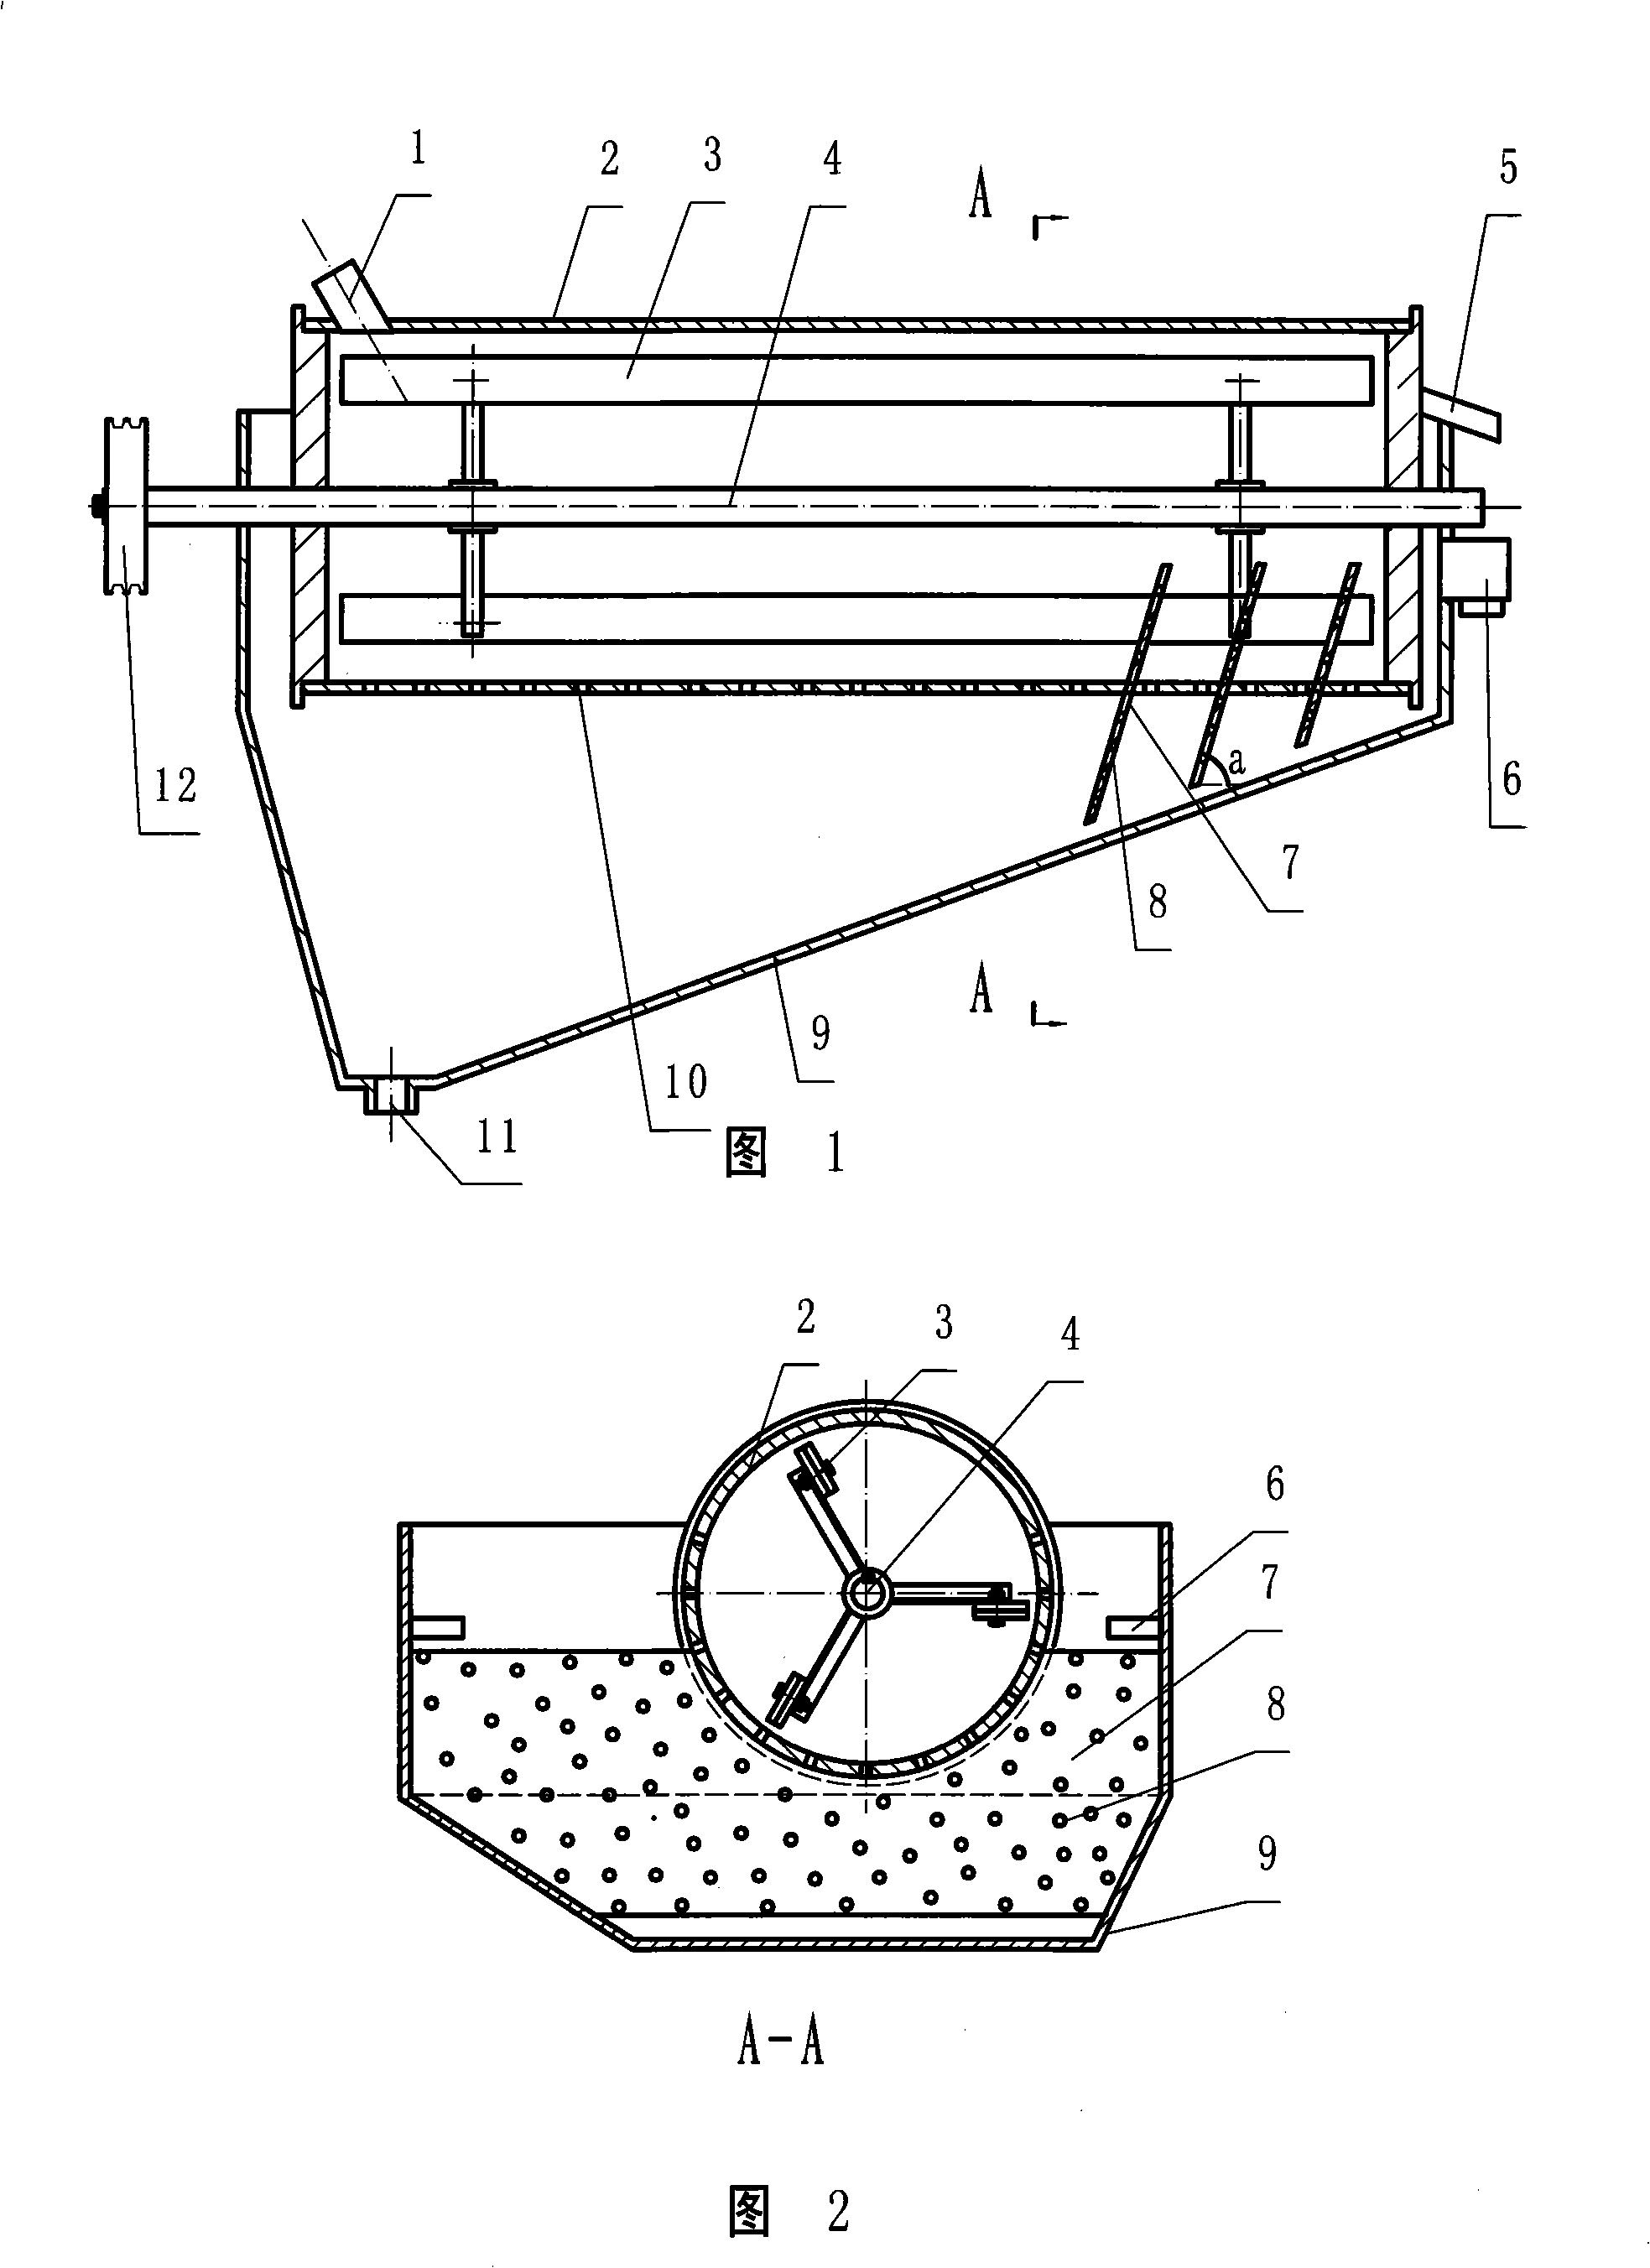 Detaching mechanism for excess material after catsup processing